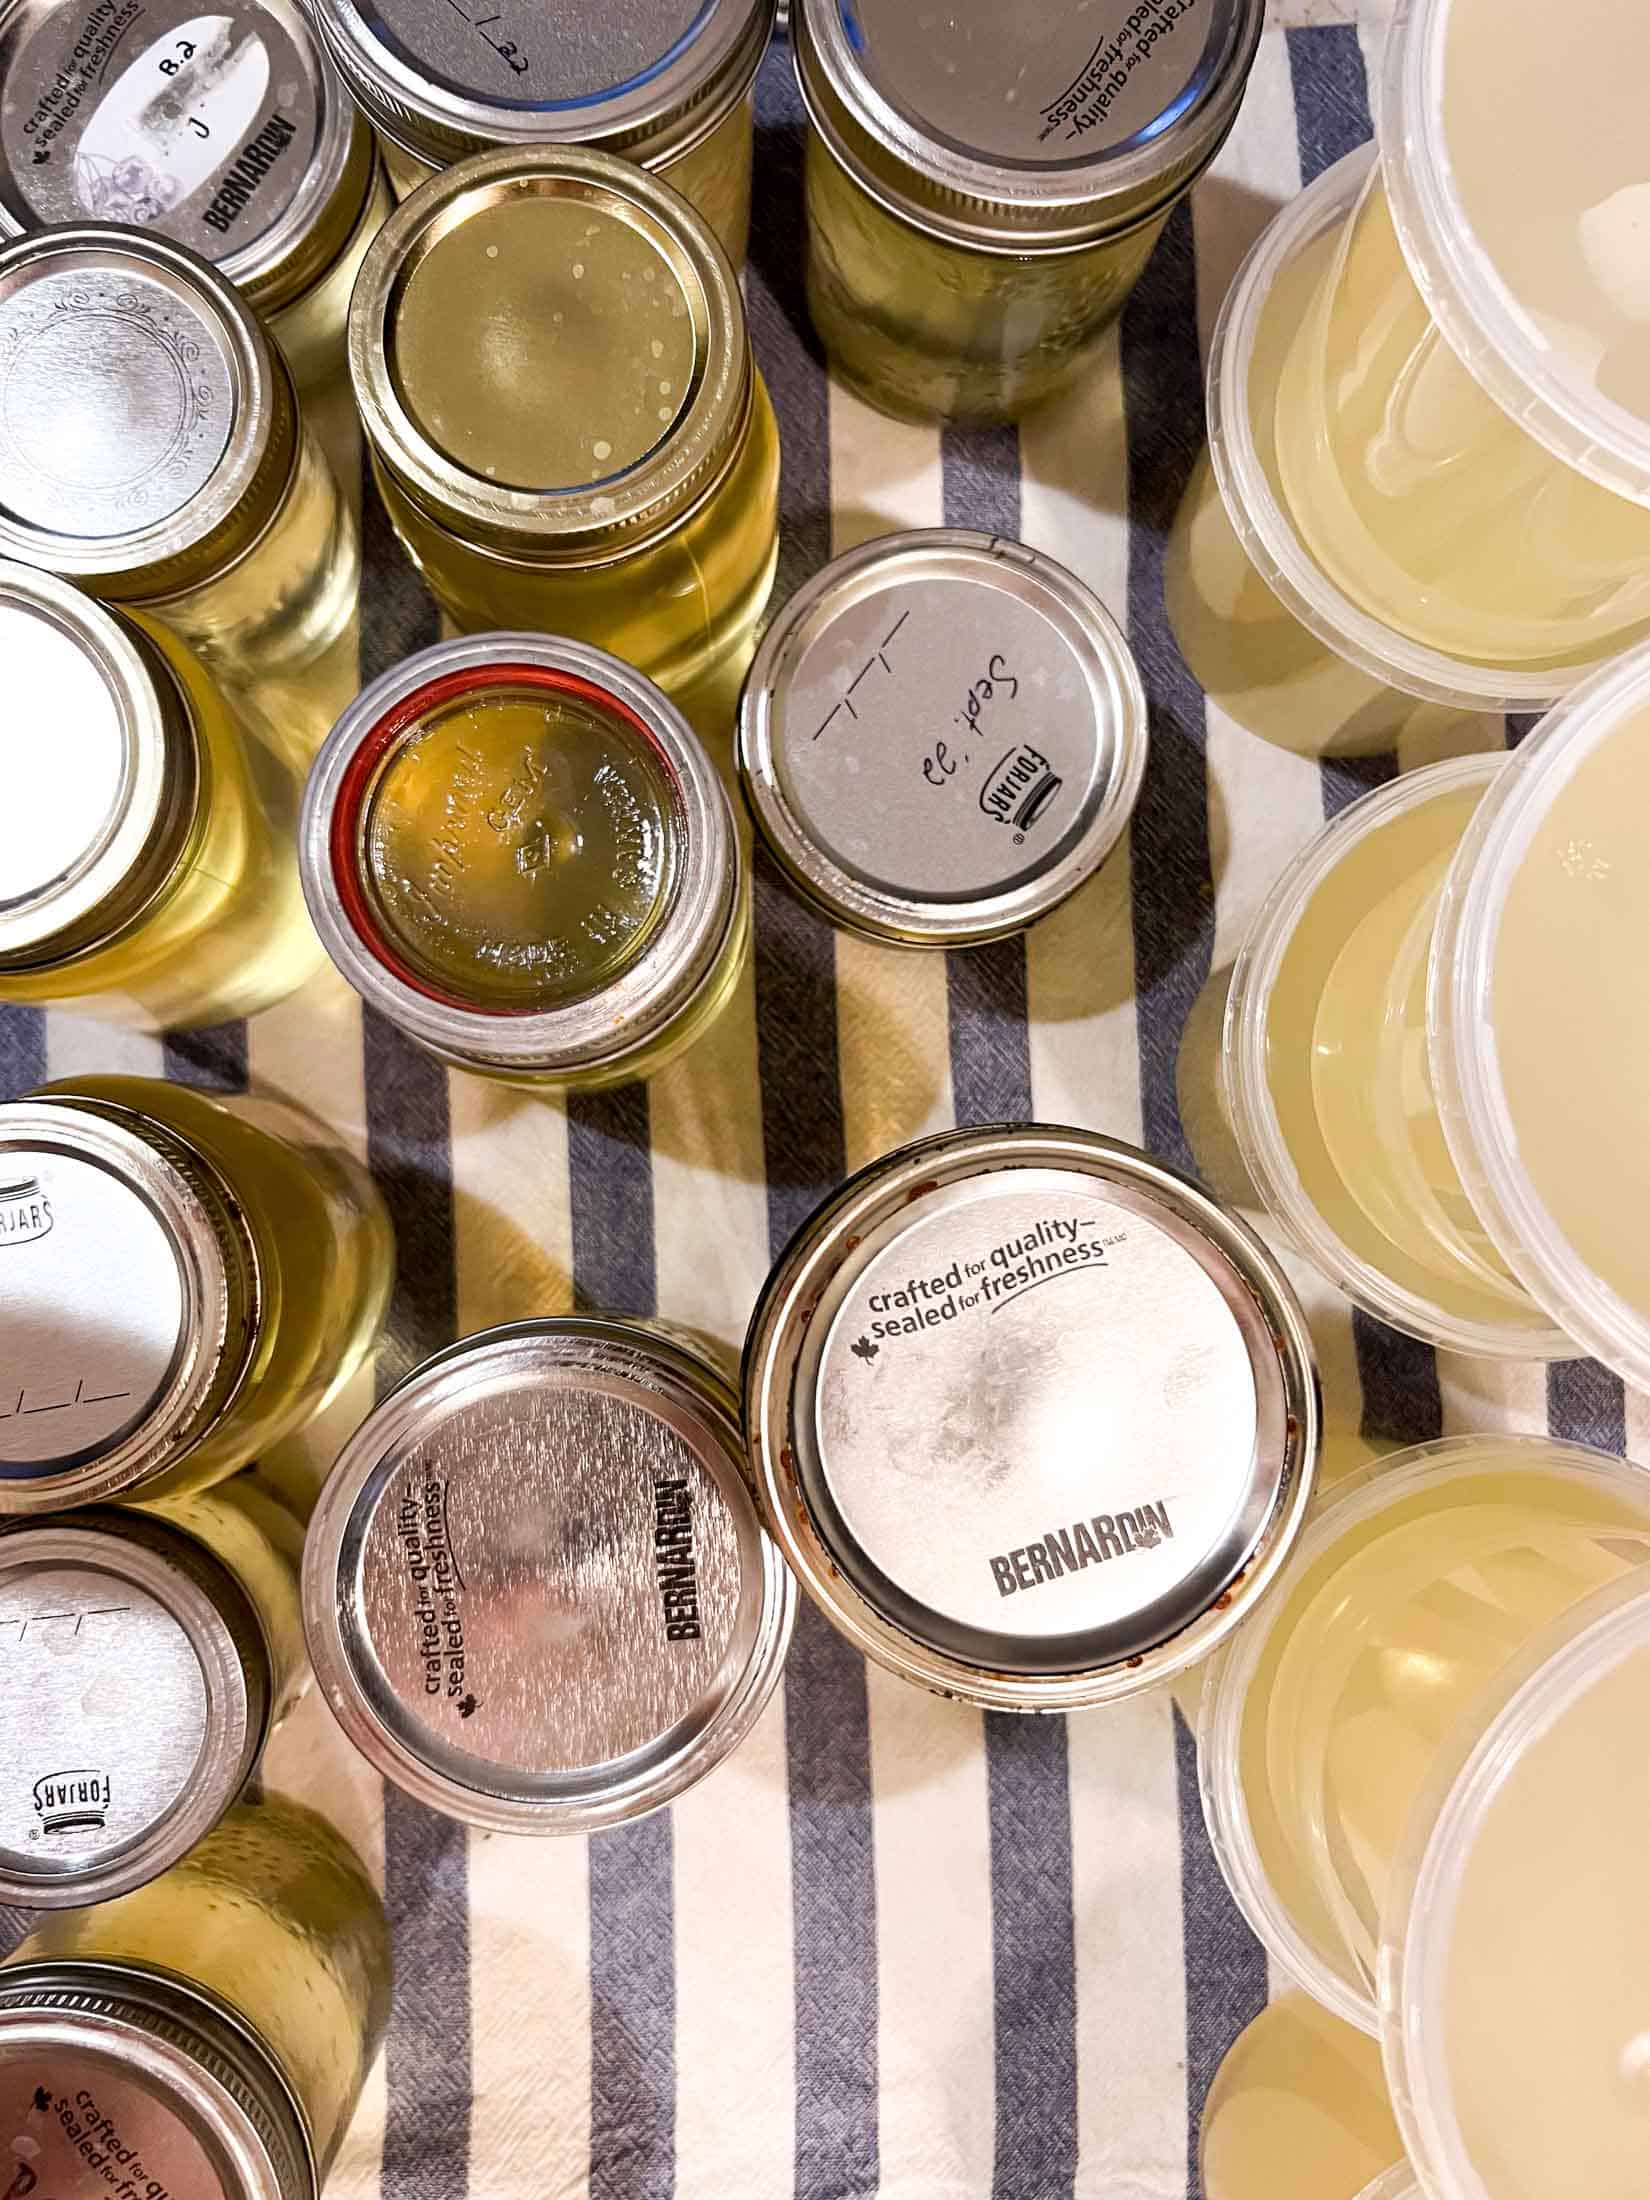 An overhead view of rendered pork fat in jars and glass containers.